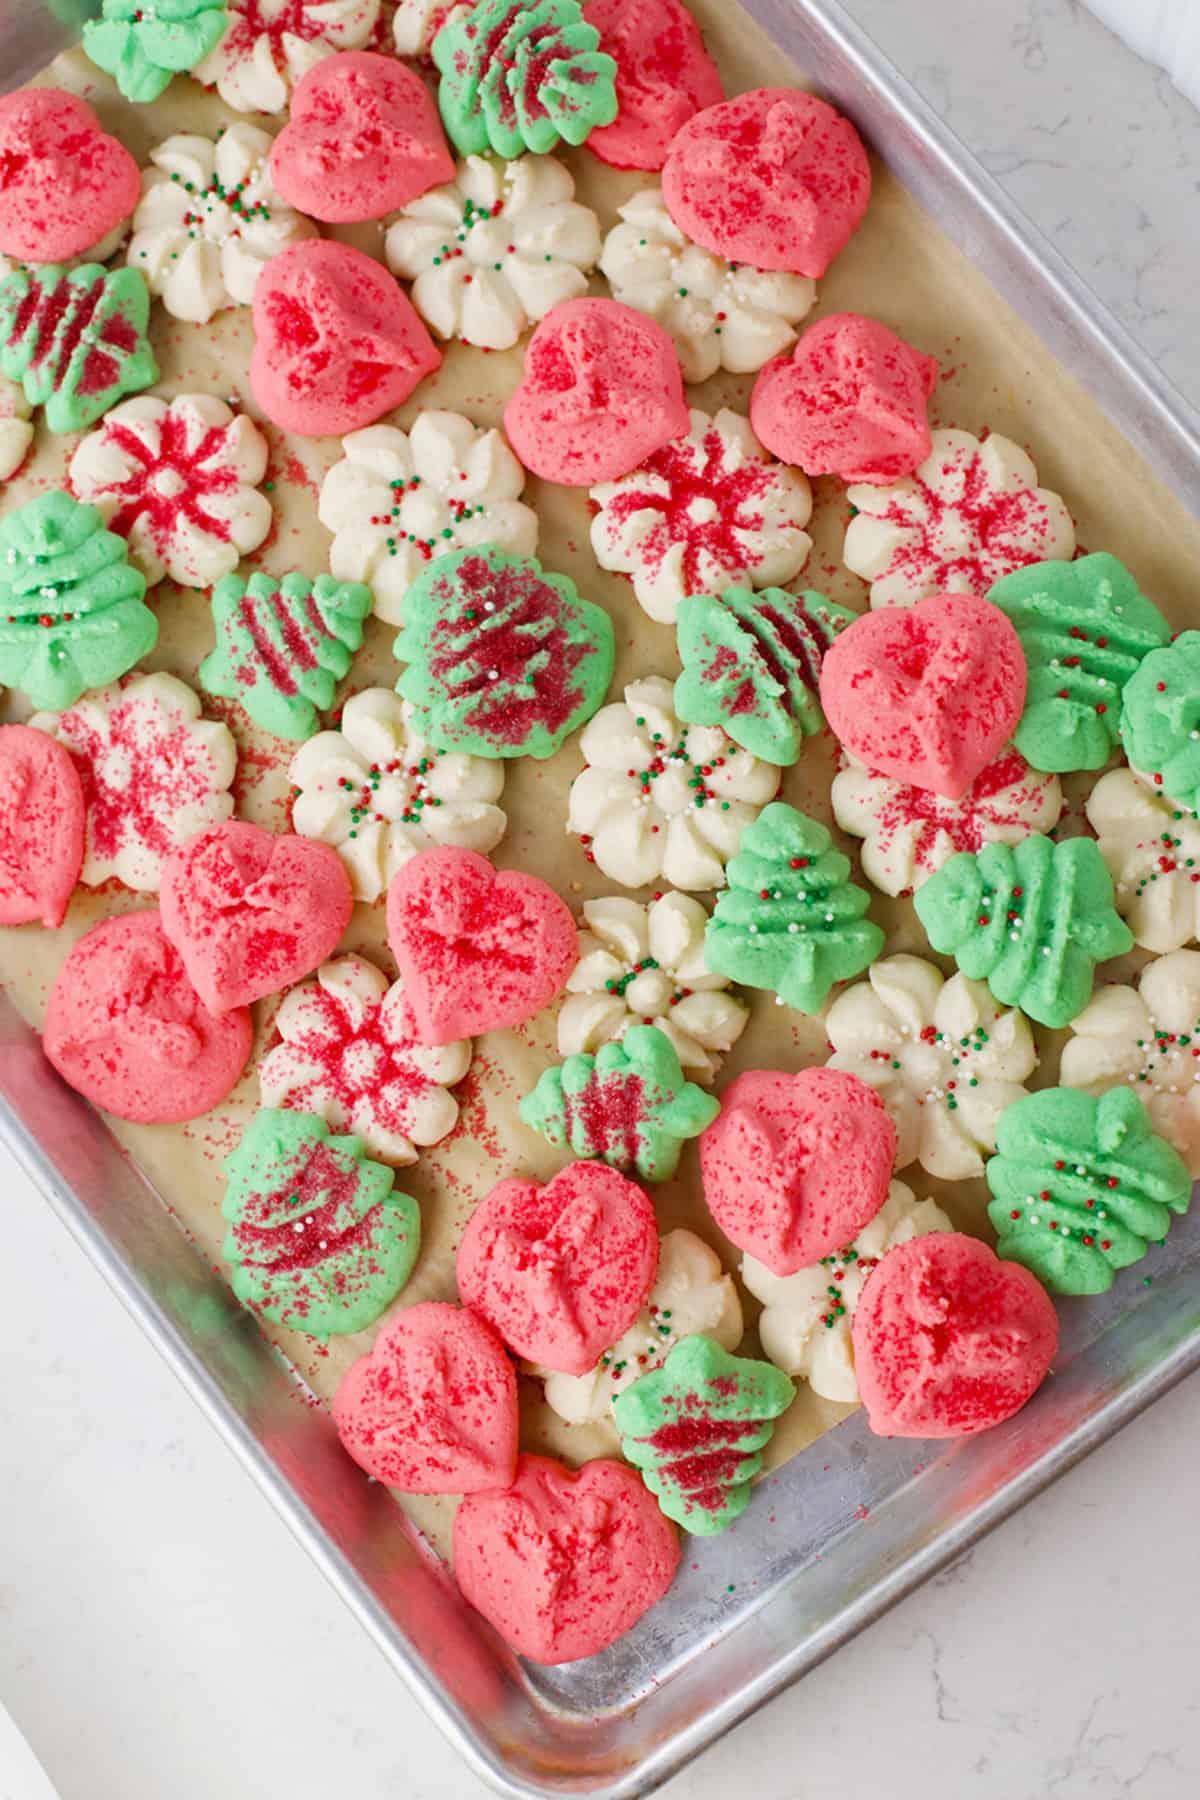 Cookie sheet with baked Christmas cookies on it.